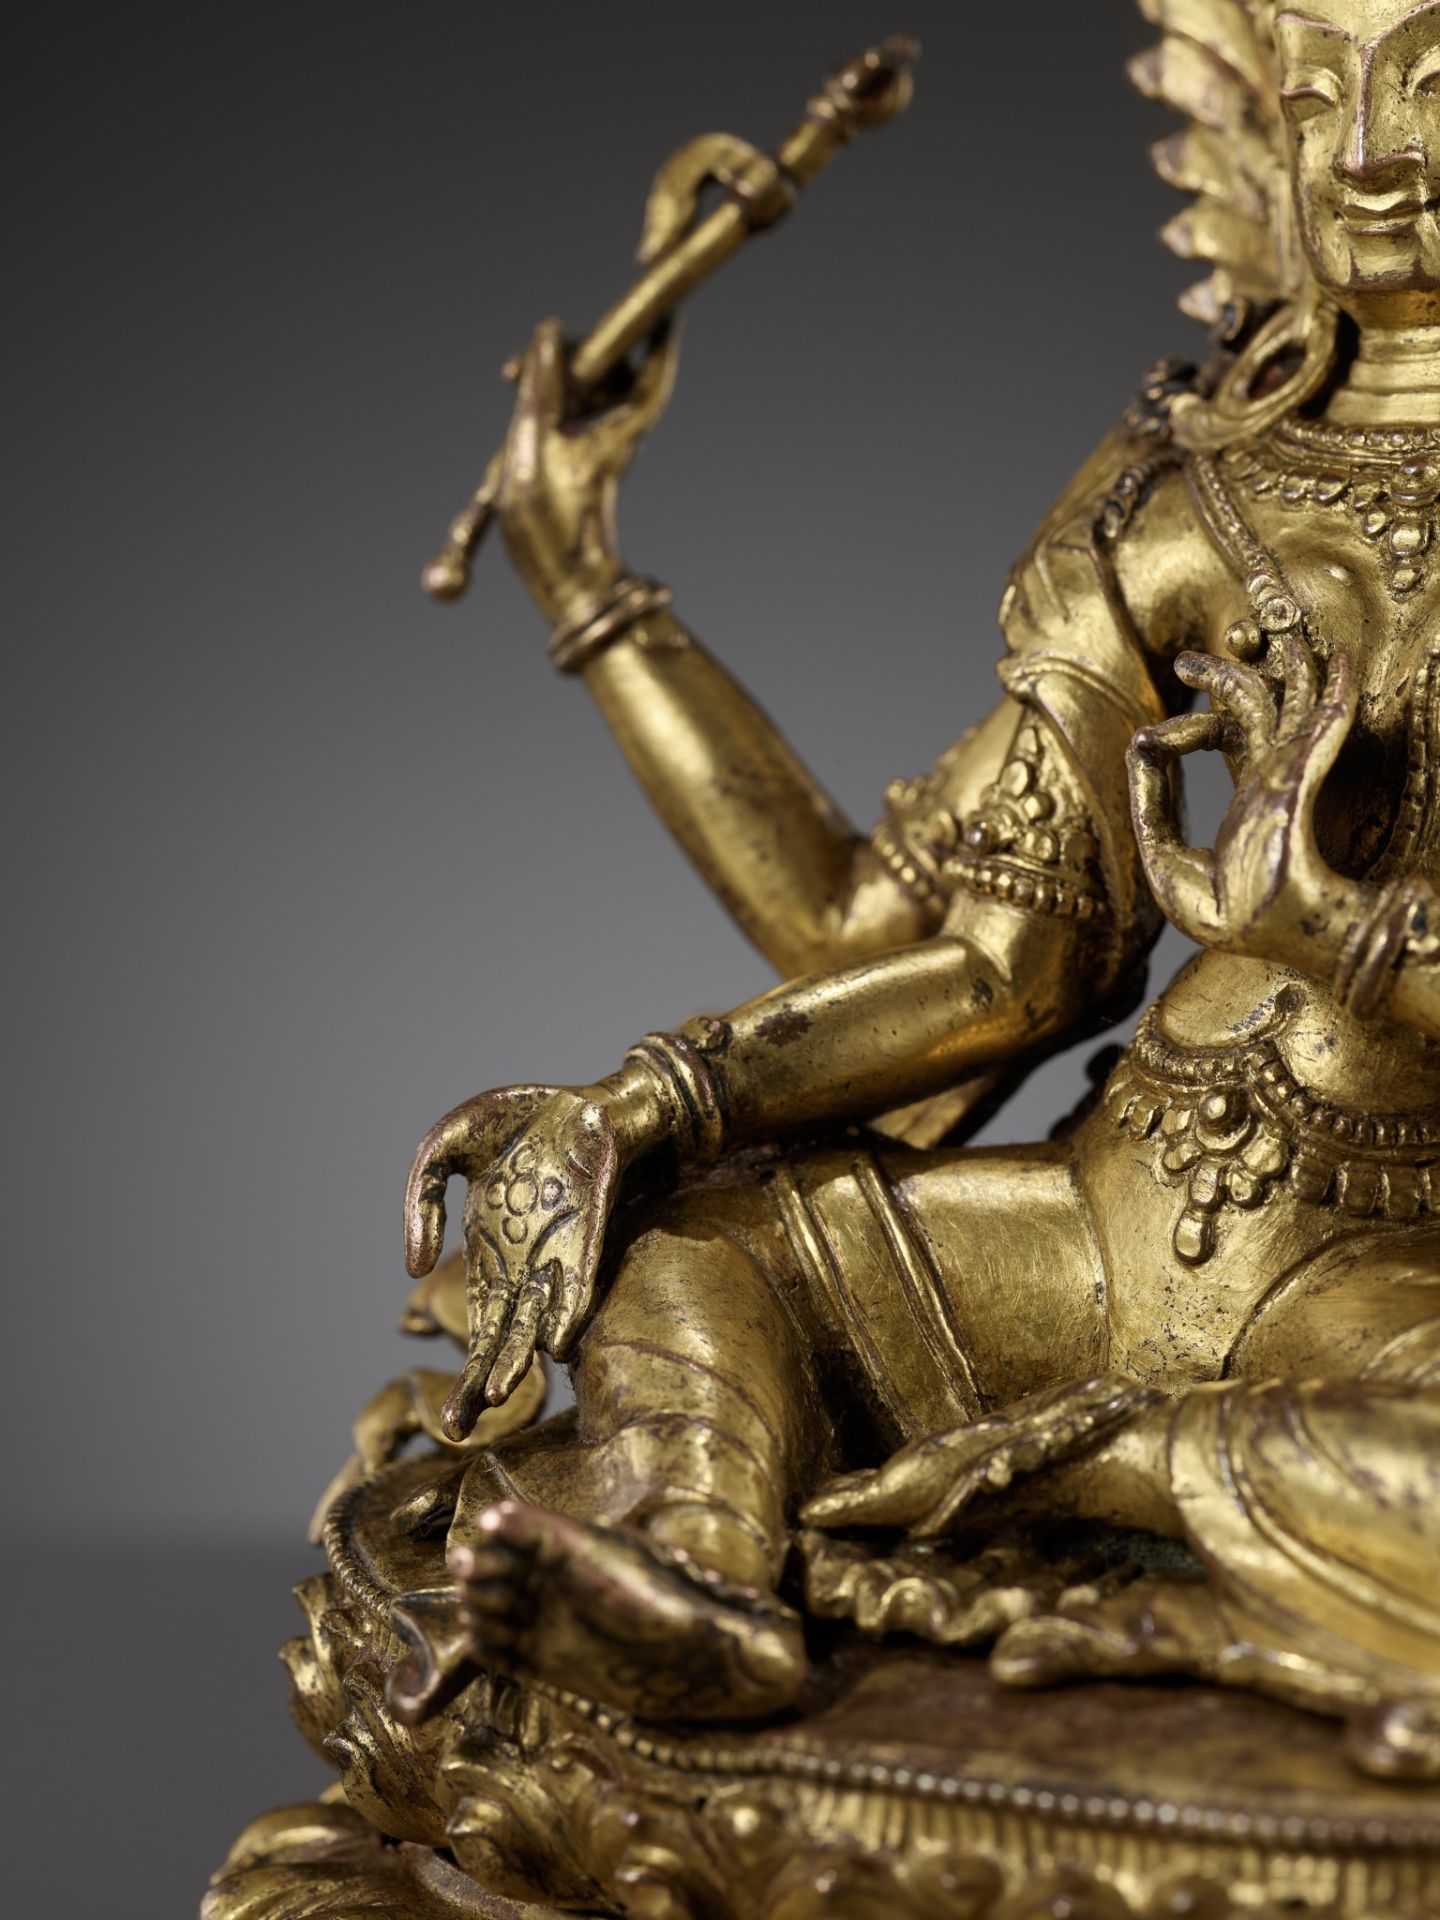 A CAST AND REPOUSSE GILT COPPER ALLOY FIGURE OF TARA, NEPAL, 18TH-19TH CENTURY - Image 5 of 13